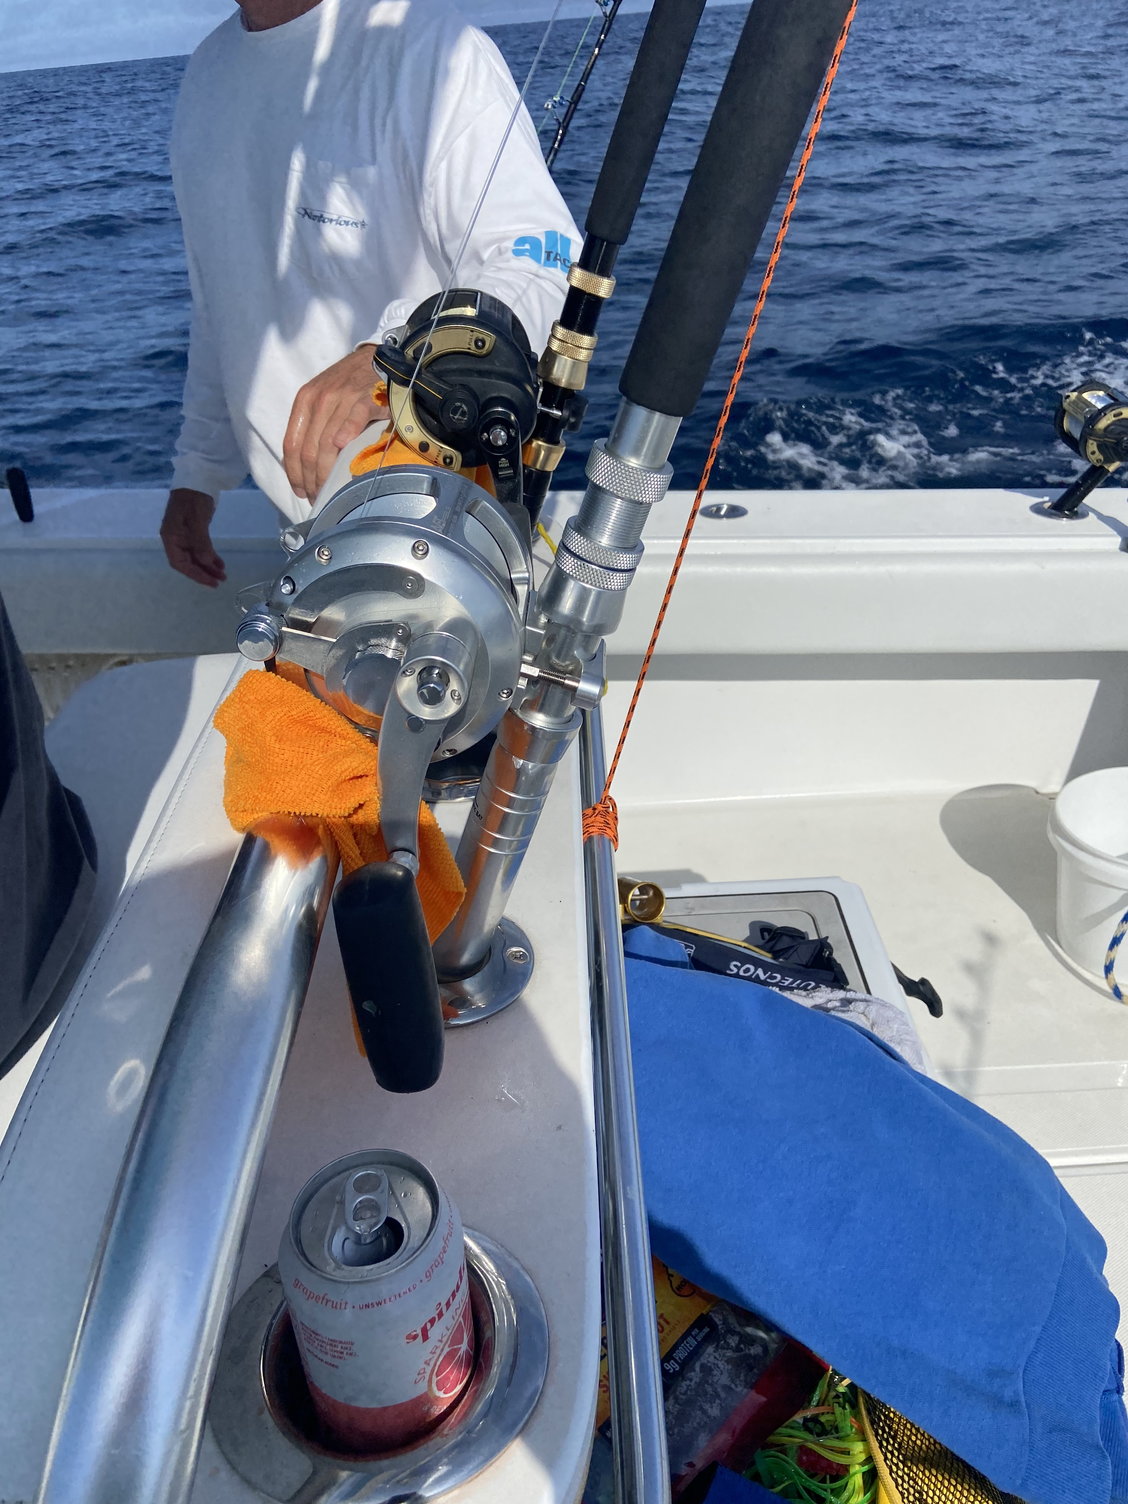 Leaning post rod holder issue - The Hull Truth - Boating and Fishing Forum